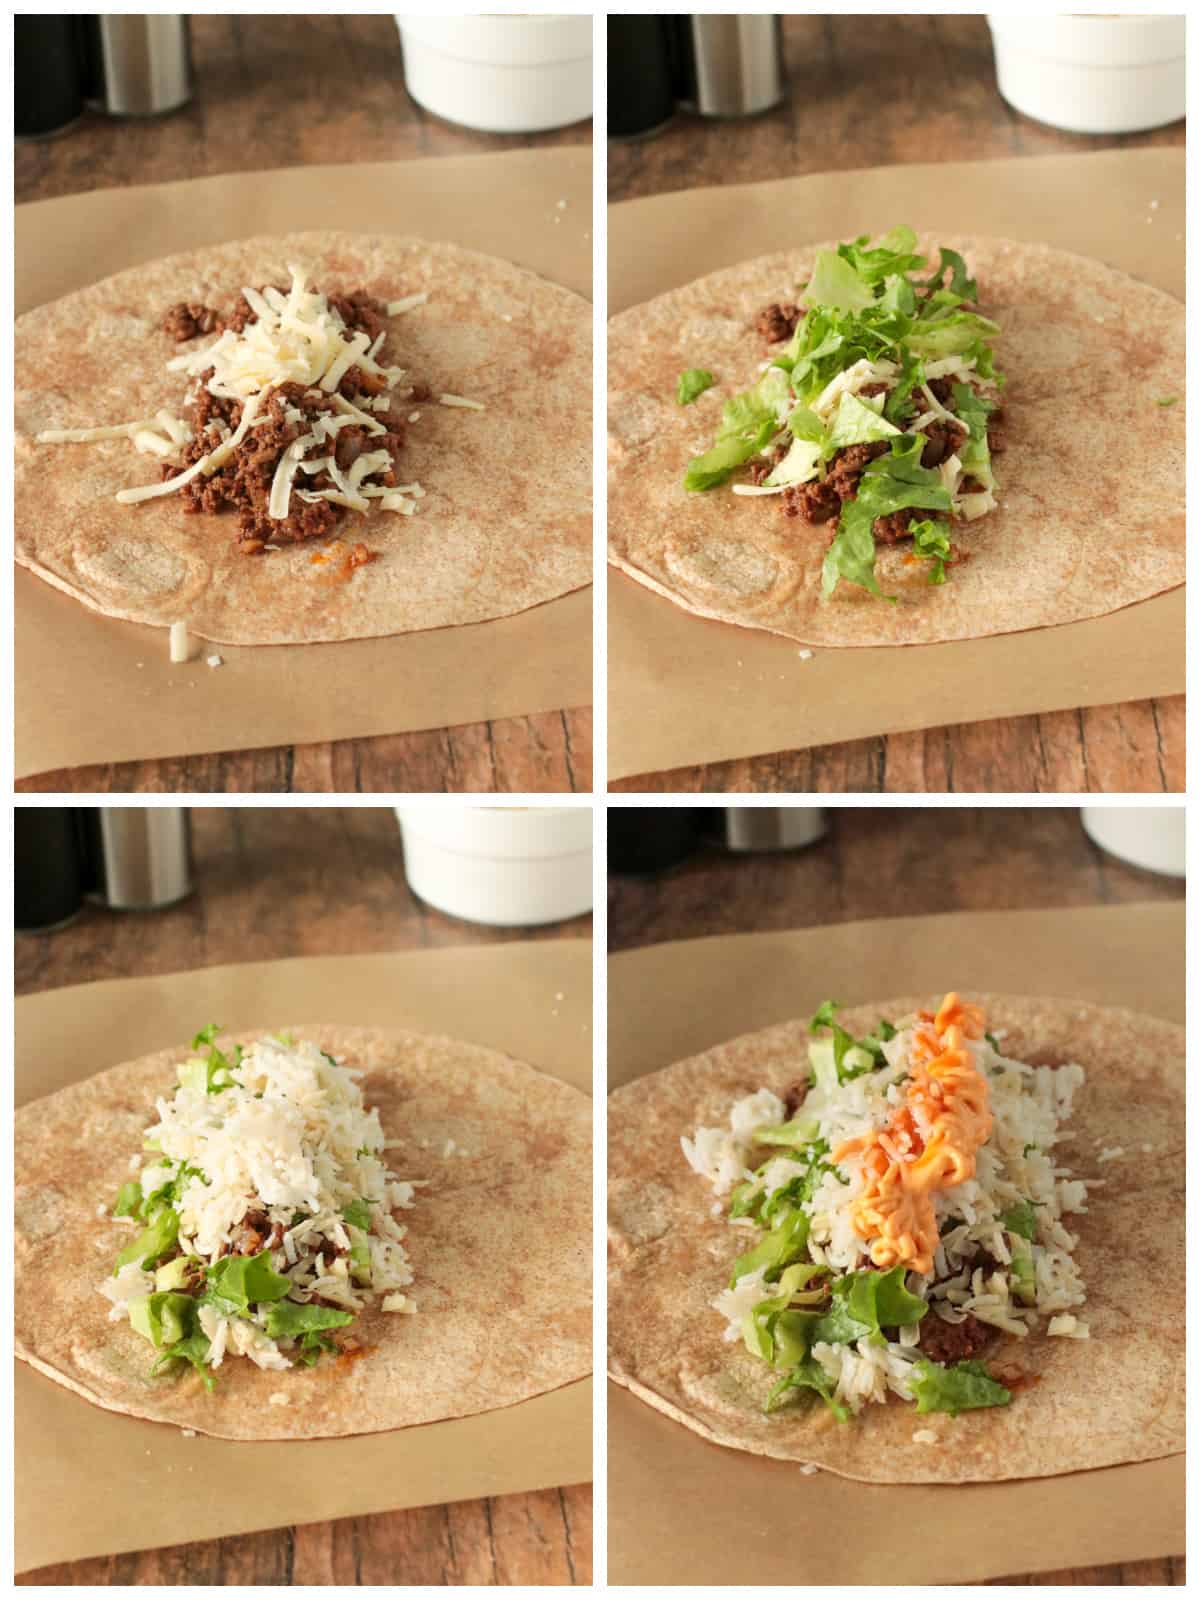 A collage showing the different fillings for the tortilla wraps.